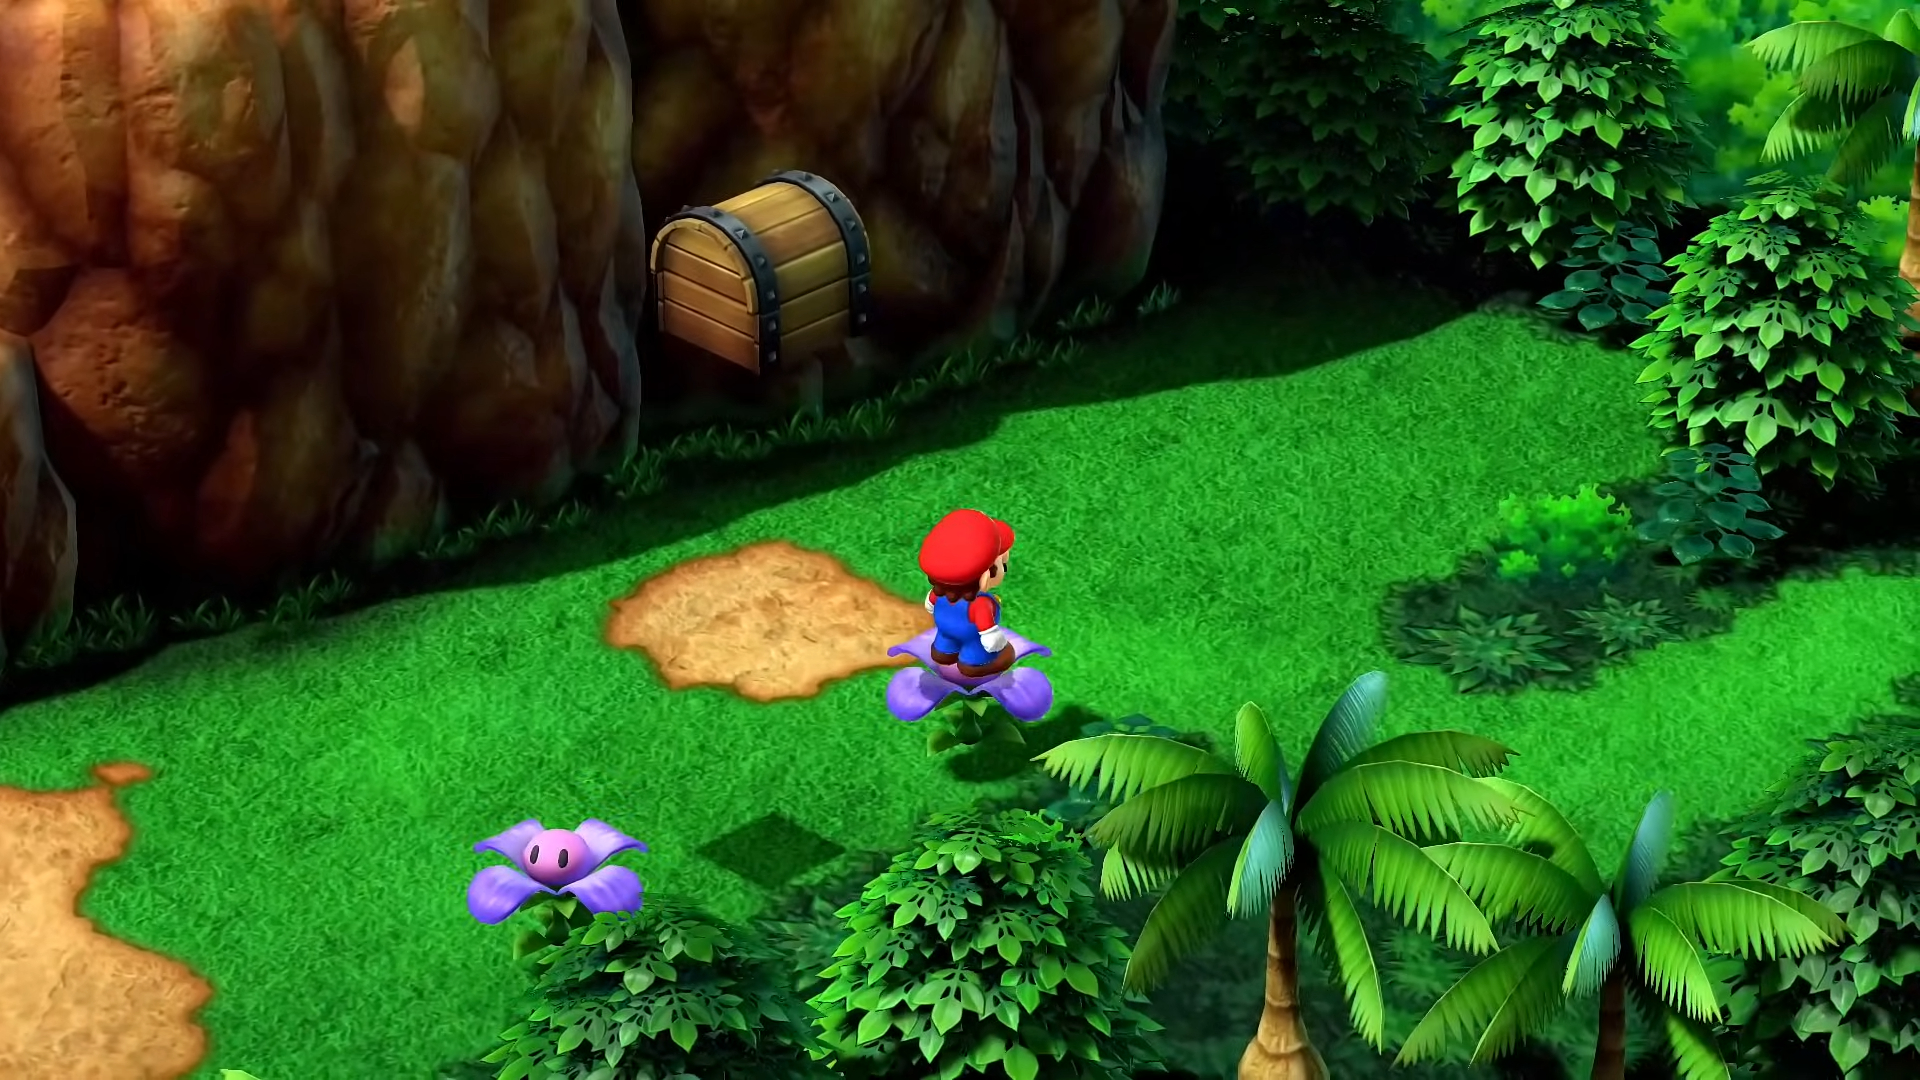 Mario standing on a flower.